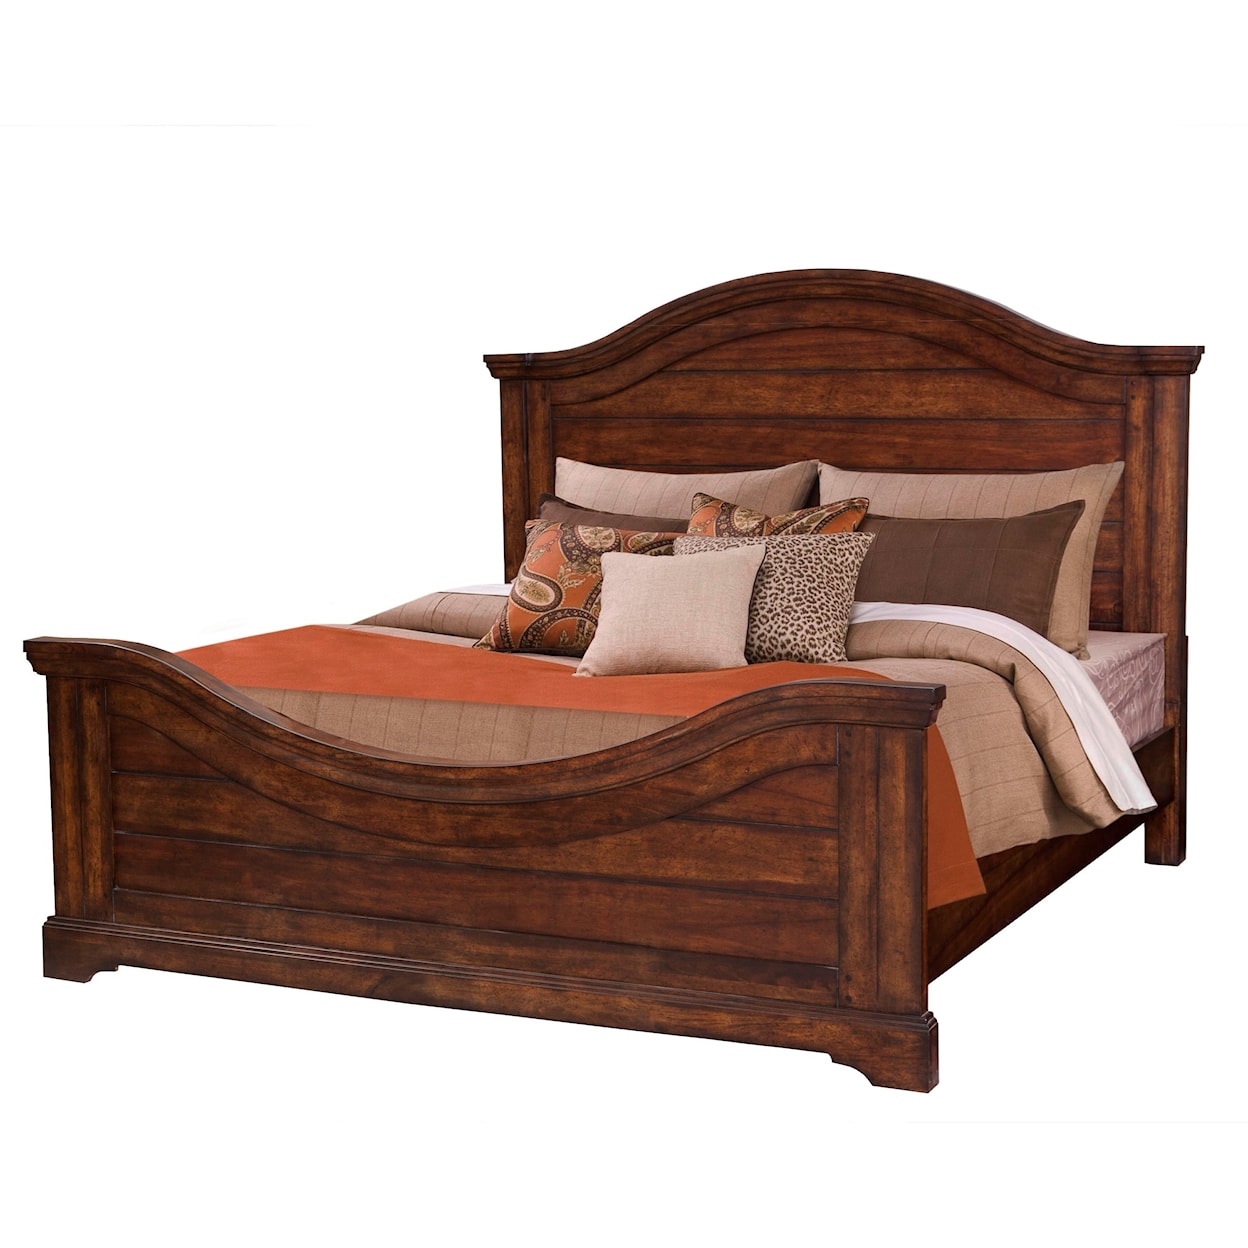 American Woodcrafters Stonebrook King Panel Bed